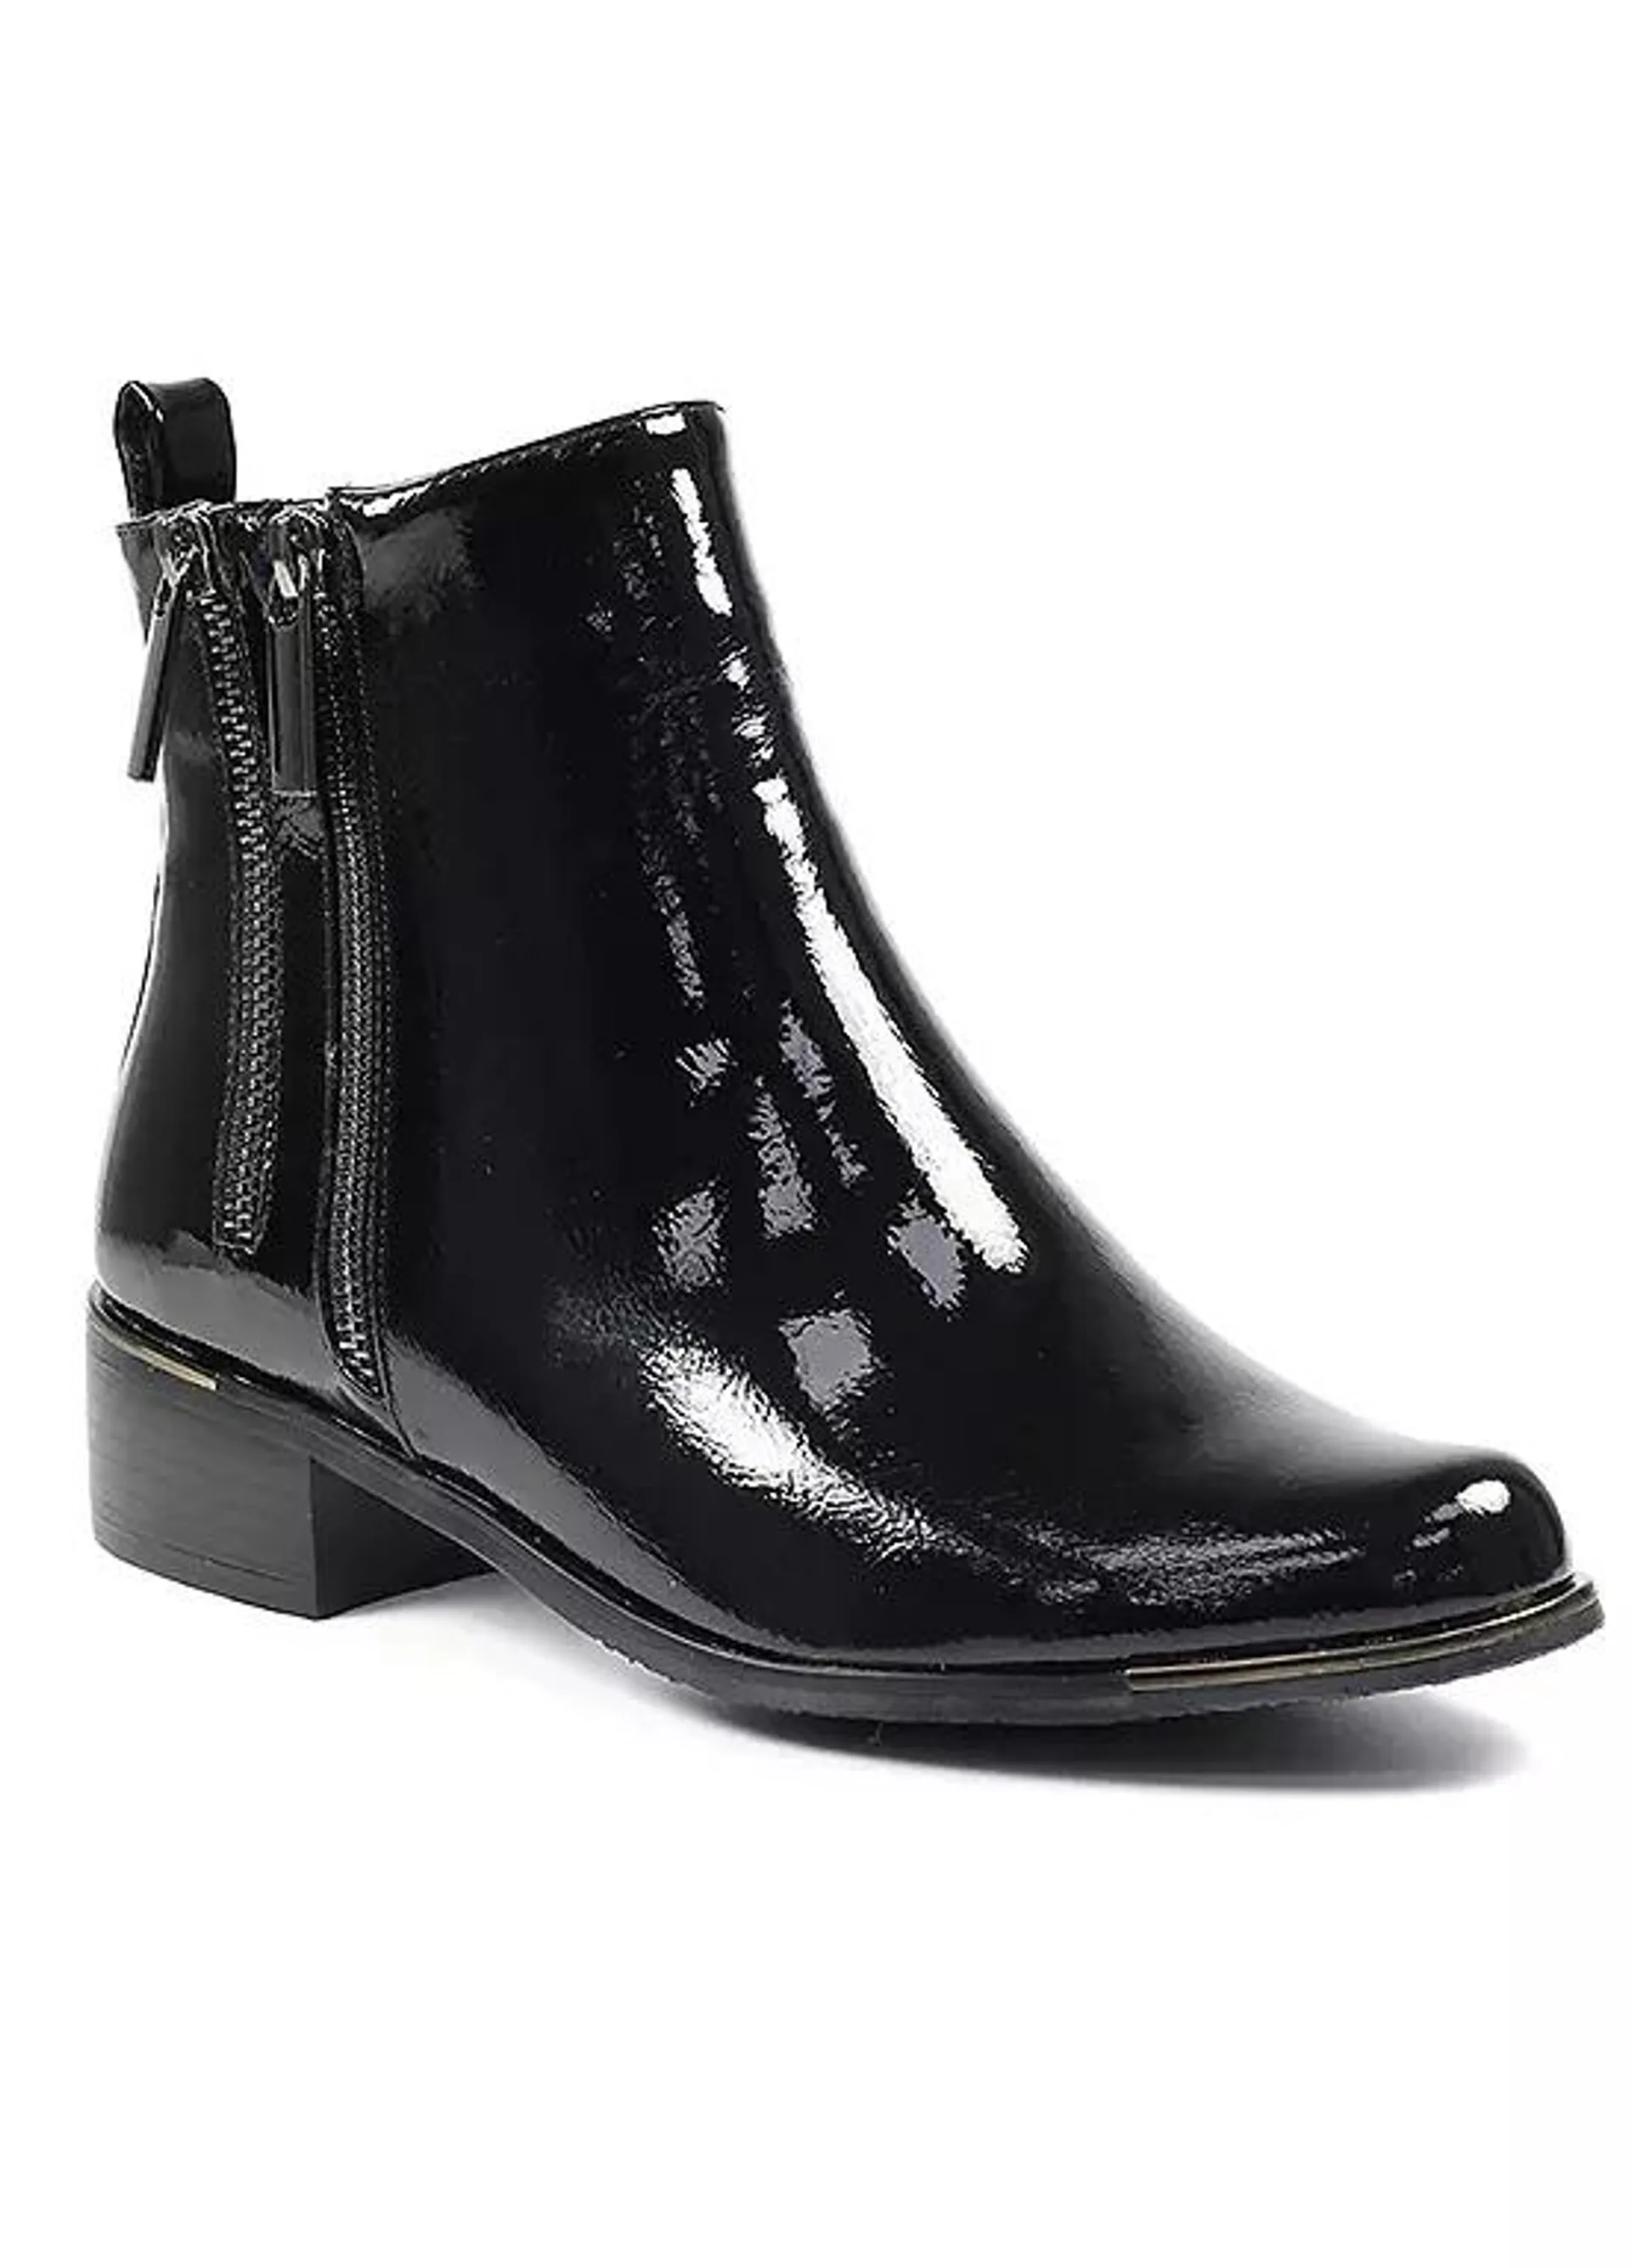 Lunar Harlan Black Patent Ankle Boots